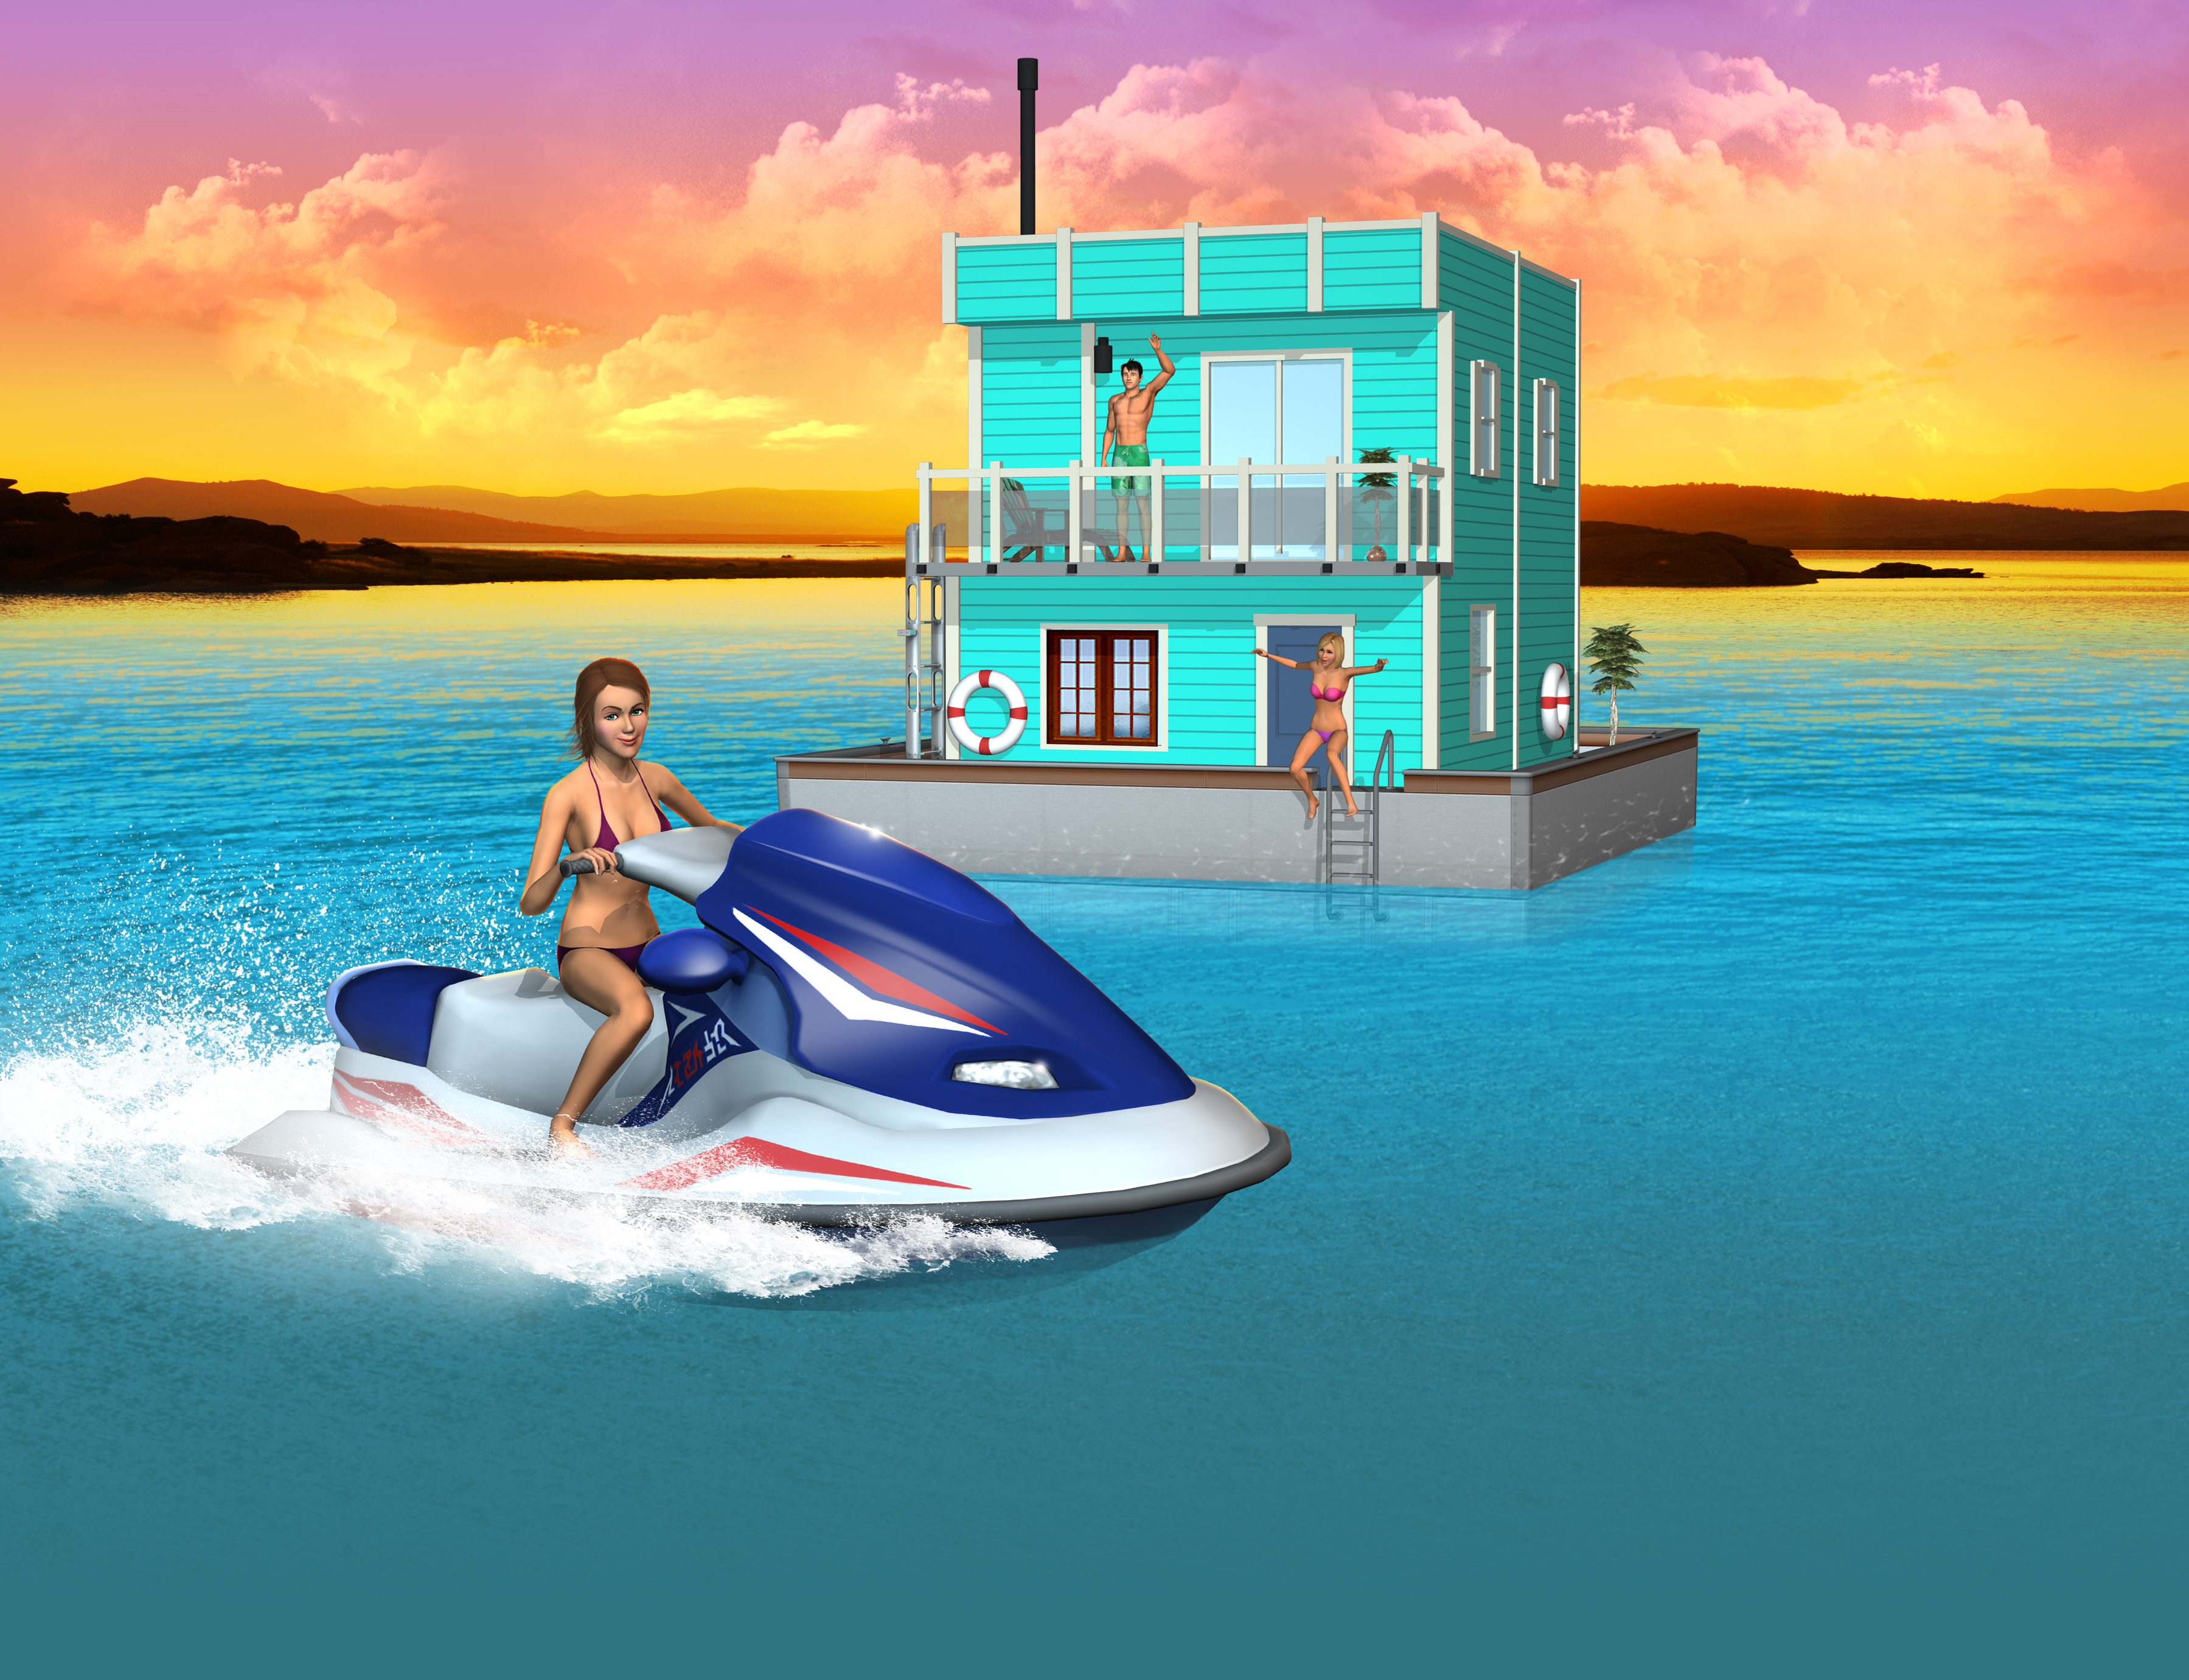 sims 3 island paradise download